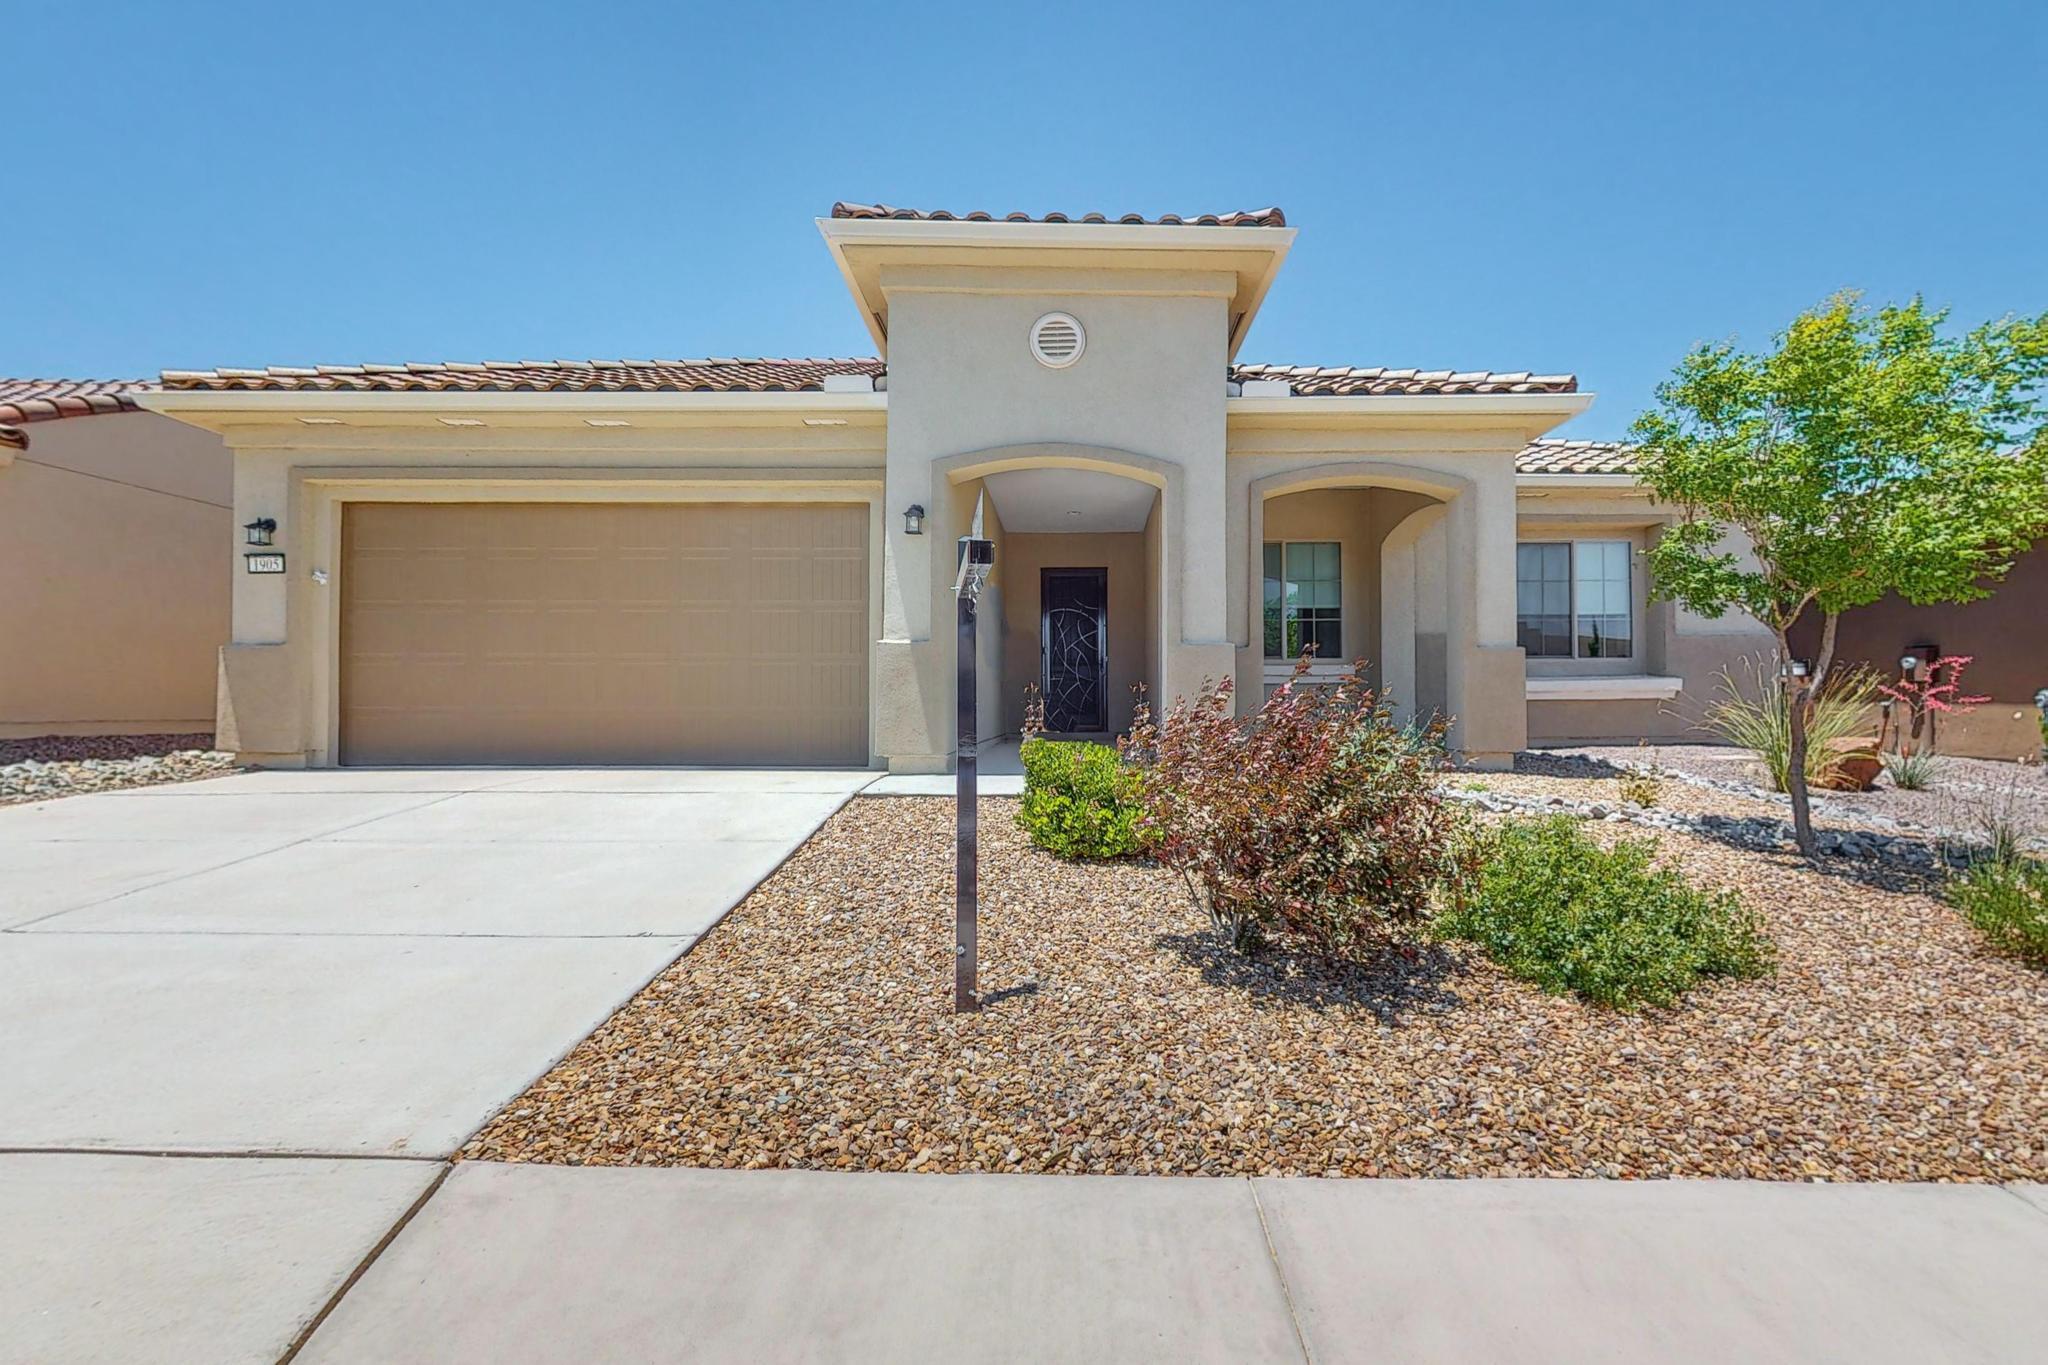 Gorgeous Home Located In Del Webb Mirehaven, a 55+ Resort-Style Community! This 'Pursuit' has 2068SF, and Offers 2 BR's, 2 BA's, Office/Den, Beautiful Kitchen,  Extended 4FT Garage w/extra storage! Home backs to open space!! There are many builder upgrades: Bow Window's at the Dining Room and Owner's Suite, French Doors at the Office/Den, Wood Look Tile, Beautiful Granite and Splash in the Kitchen, Cabinets have Pull-Out Drawers, Convection/Microwave, Wall Oven, Gas Cooktop,  Large Island,  Owners Bath has large Shower with Tile Surround, Large WIC. Owners added Ceiling Fans and had the Backyard  Patio Extended with a Pergola Cover and all the patio plus extension have pavers! Backyard has Turf and was professionally landscaped! The Sandia Amenity Center has Daily Activities,...See More!